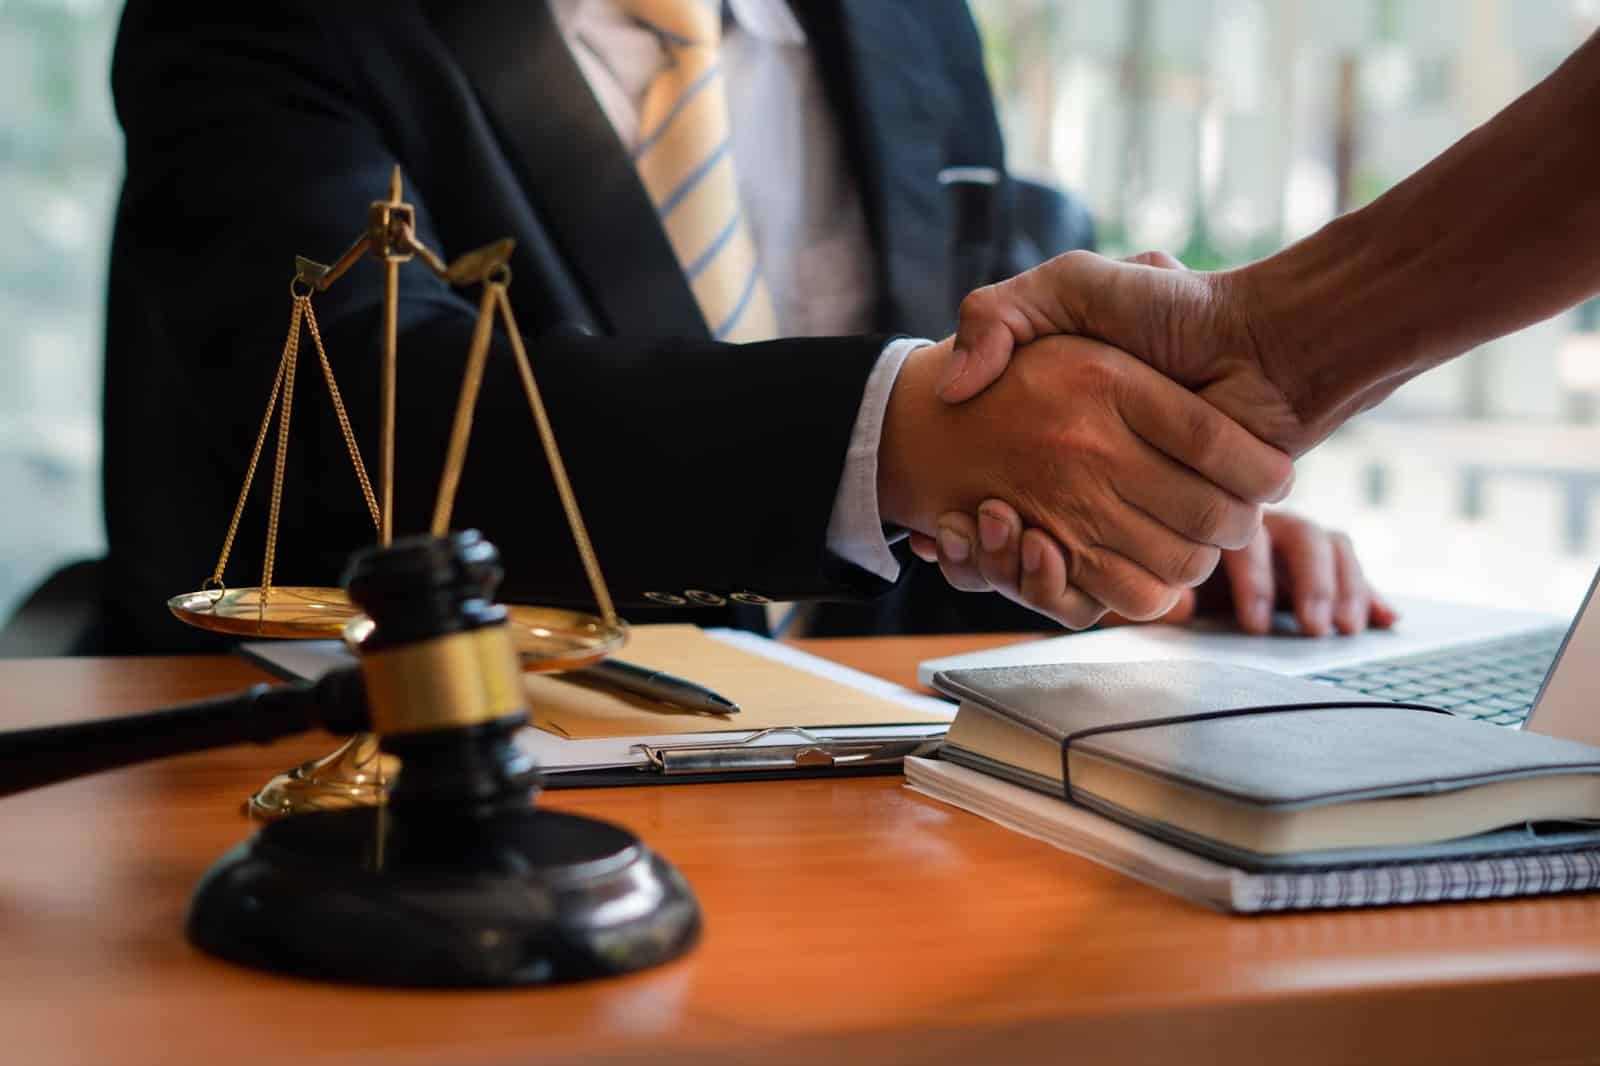 Client and attorney shaking hands over desk with documents, gavel, and justice scales | New Direction Family Law